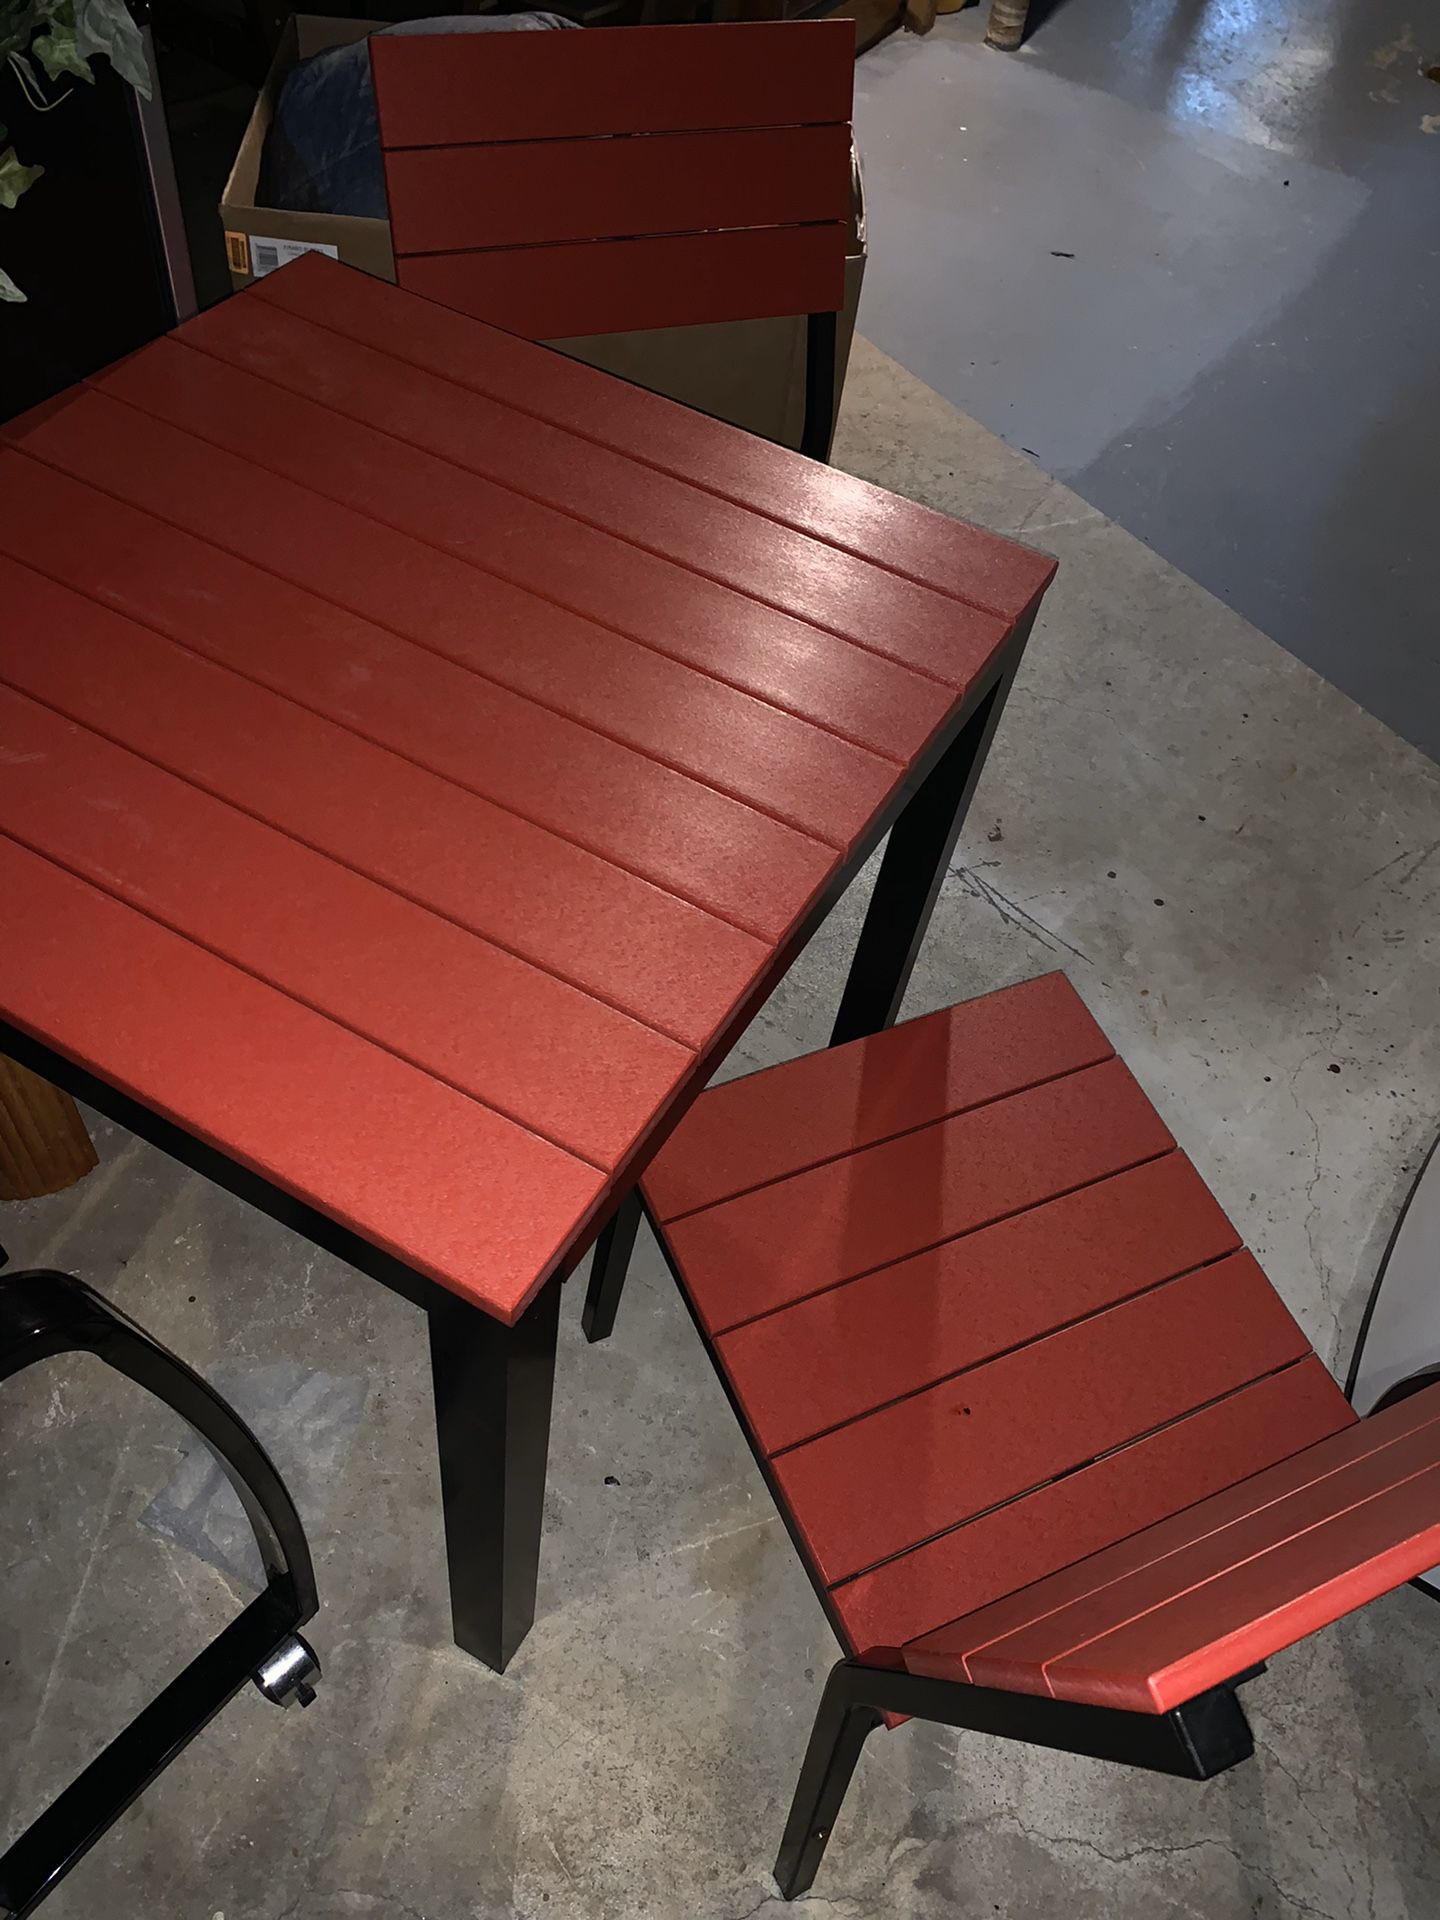 Patio set red black table with two chairs